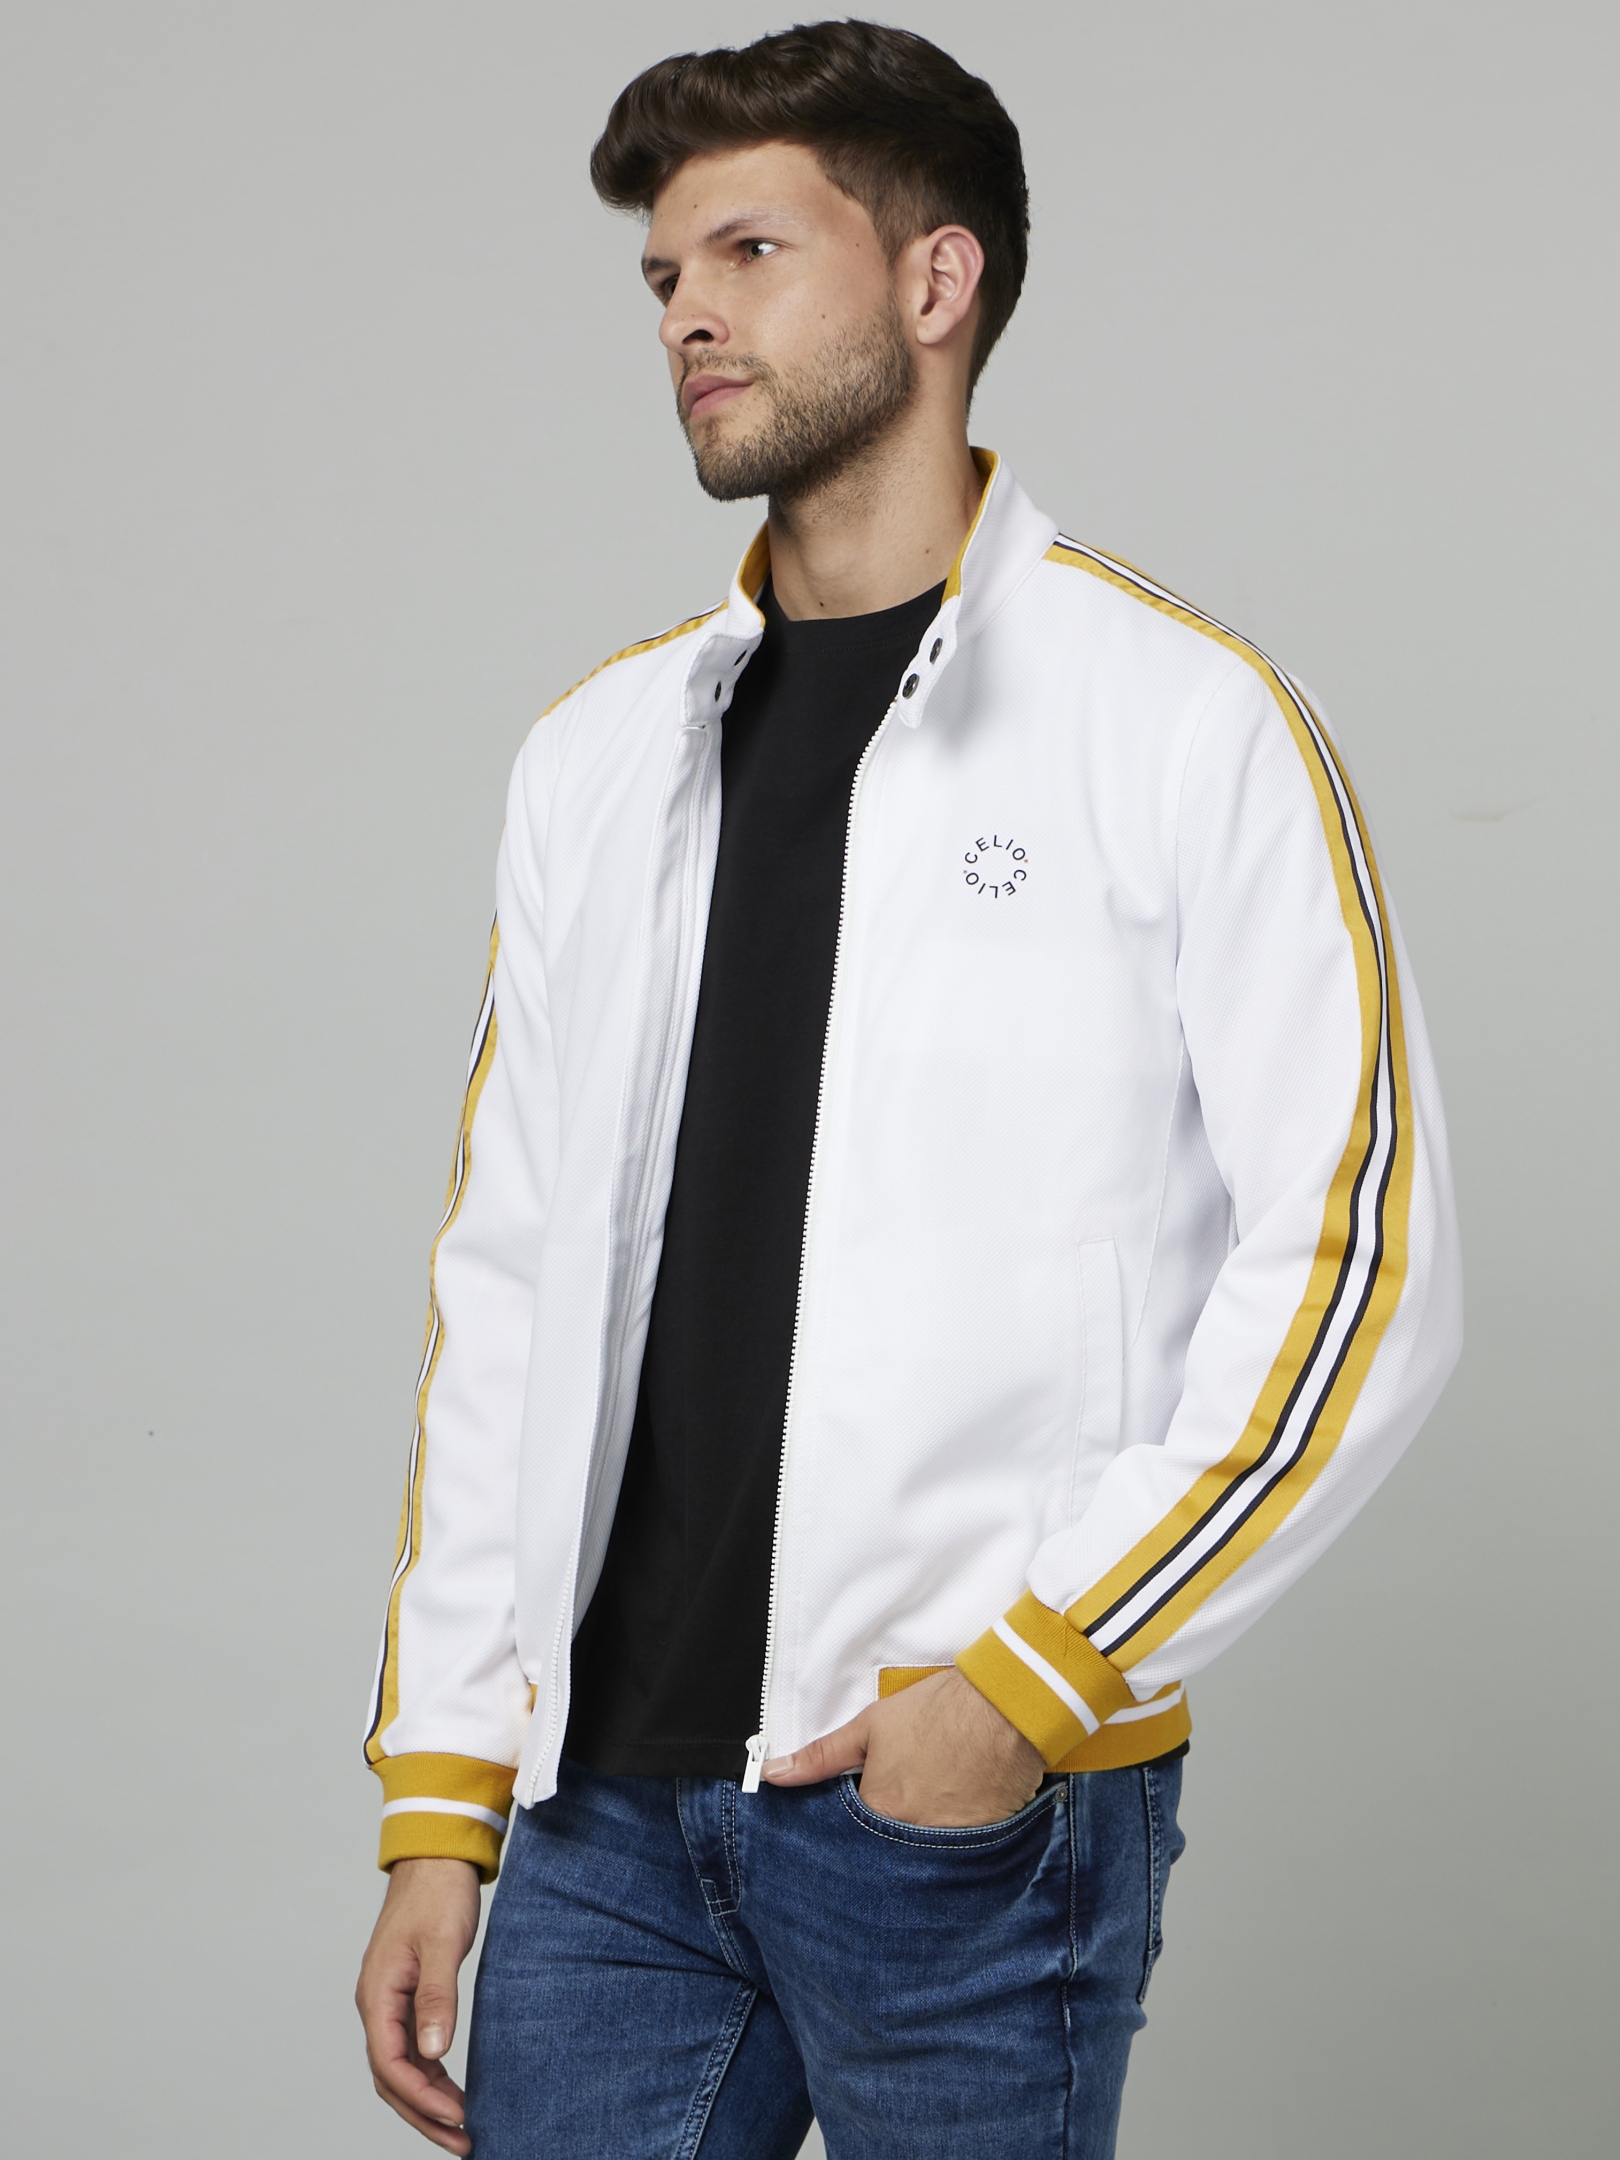 Men's White Solid Western Jackets